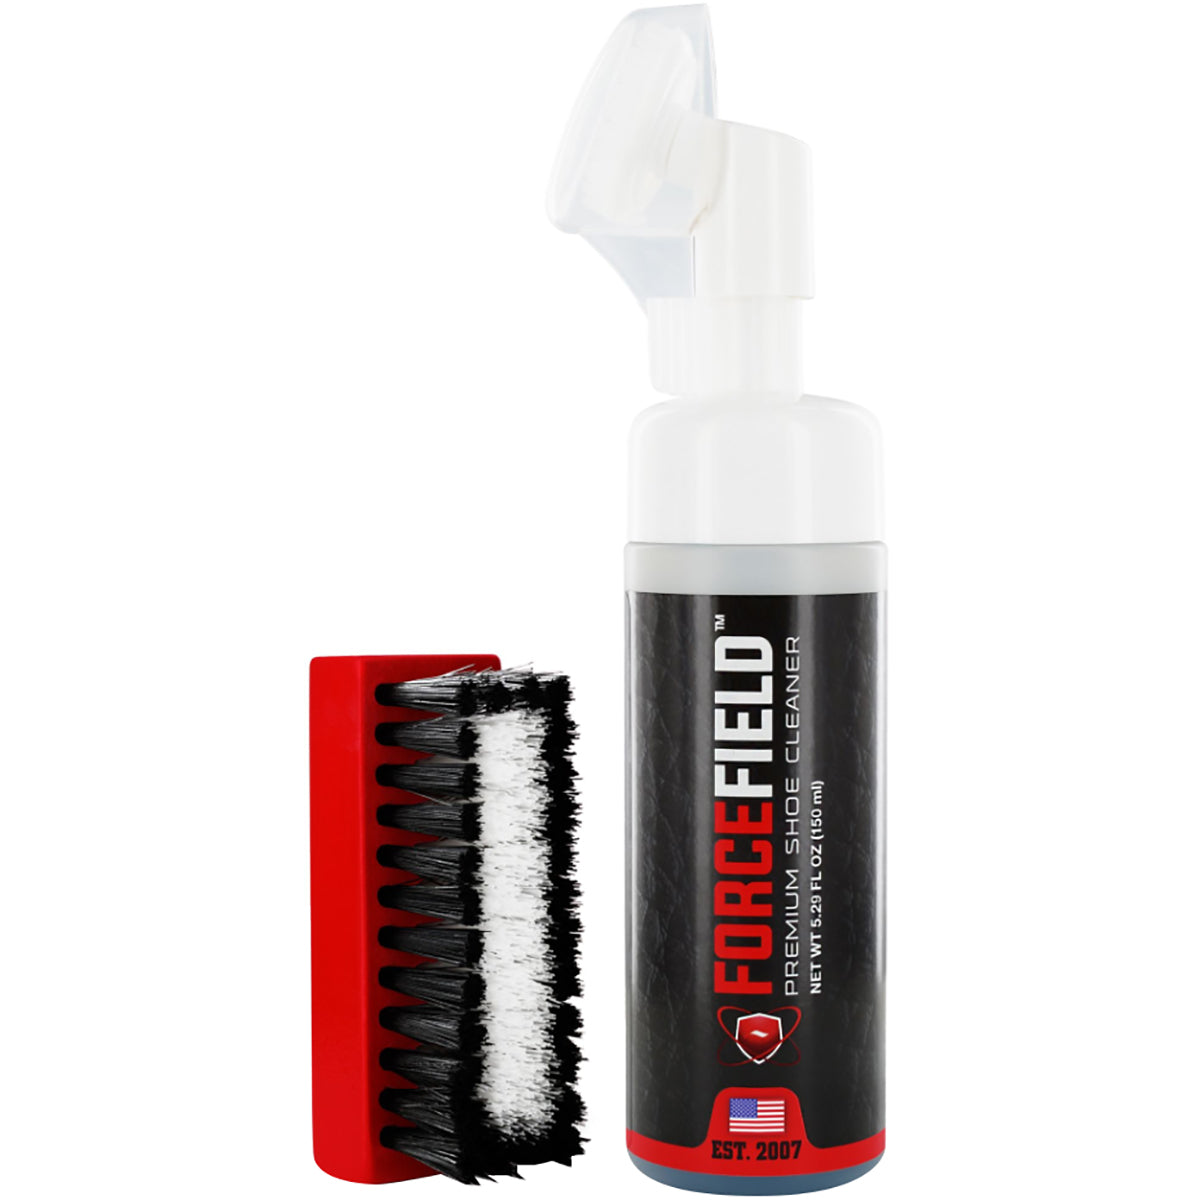 ForceField Premium Shoe Cleaner Kit Forcefield